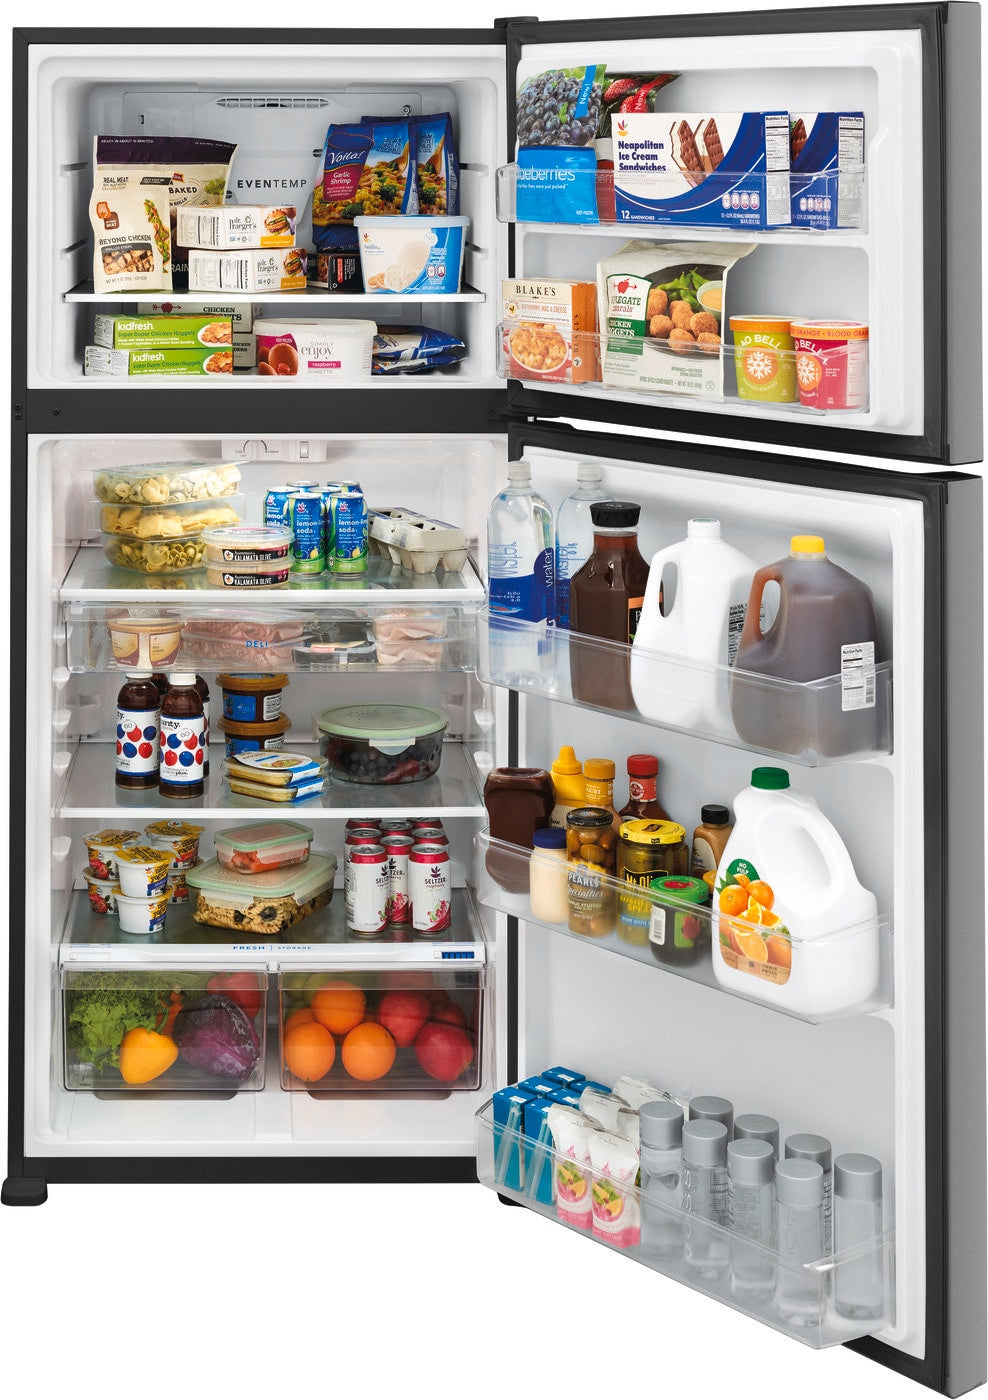 Frigidaire - 30 Inch 20 cu. ft Top Mount Refrigerator in Stainless - FFTR2045VS